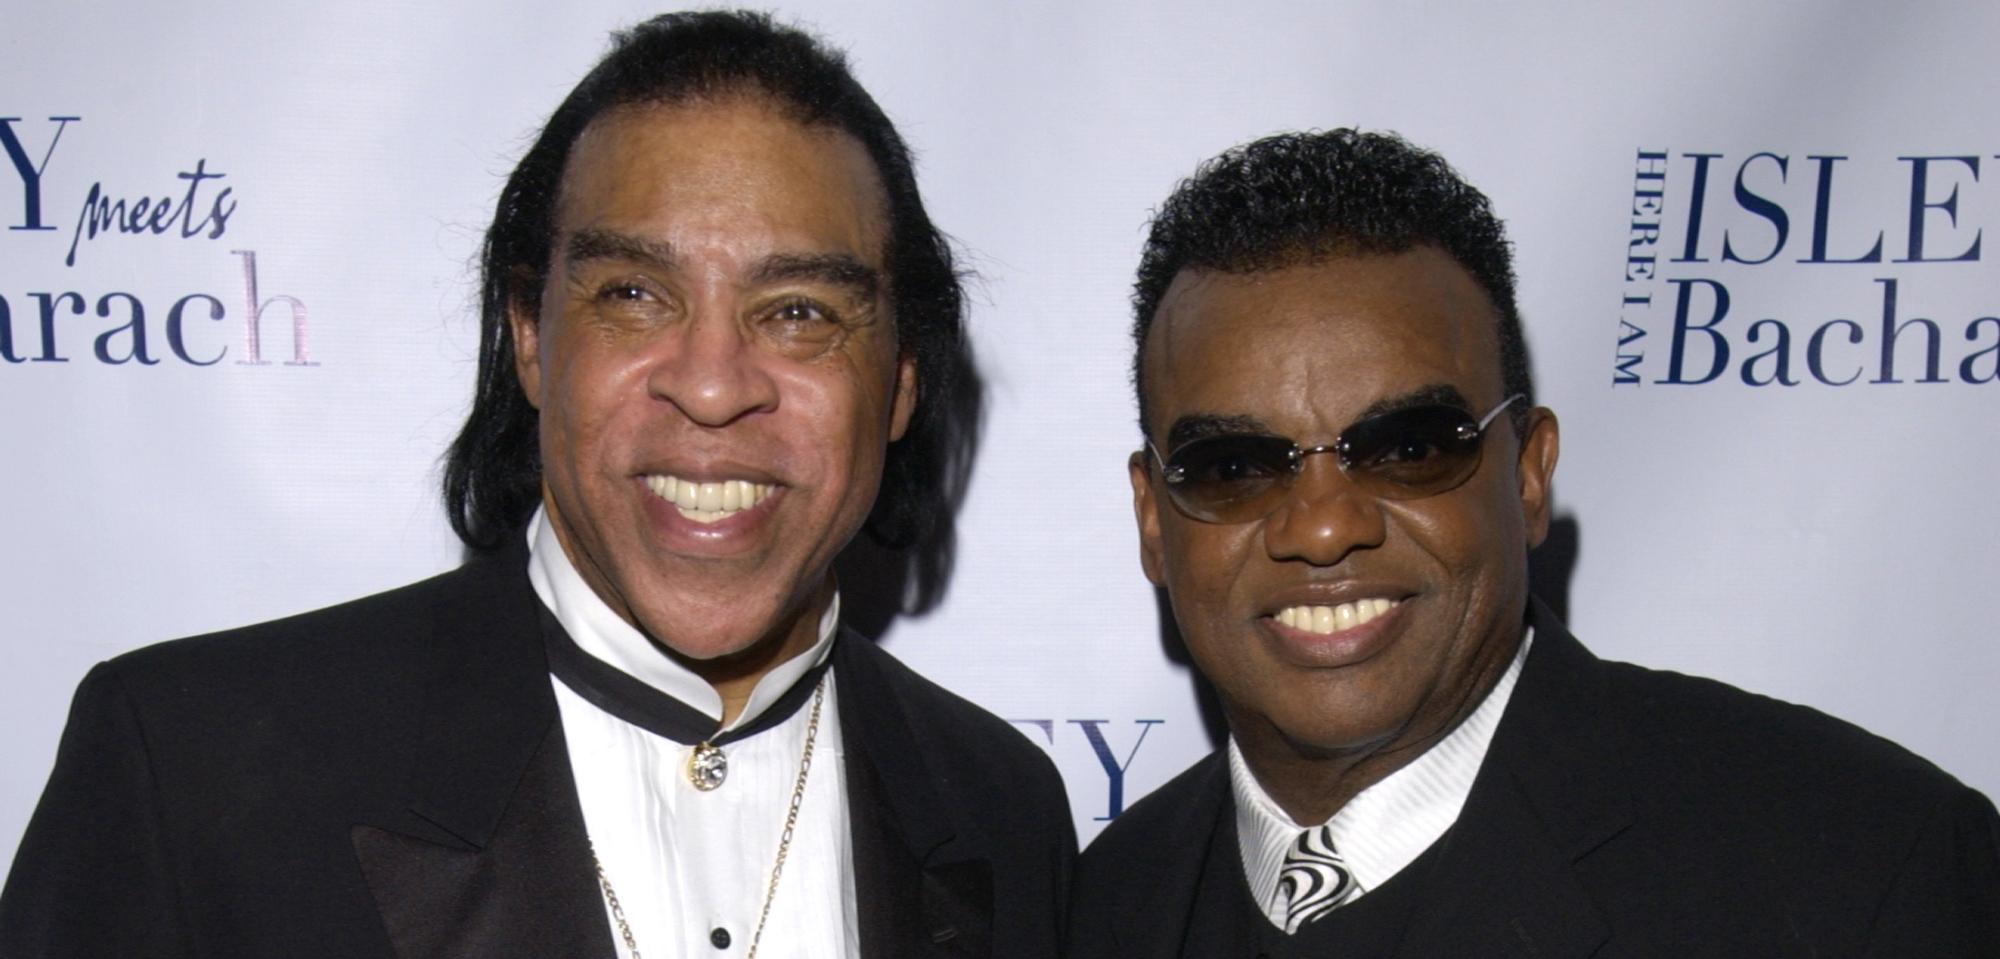 Rudolph and Ronald Isley (brothers) during "Isley Meets Bacharach" Record Release Party.